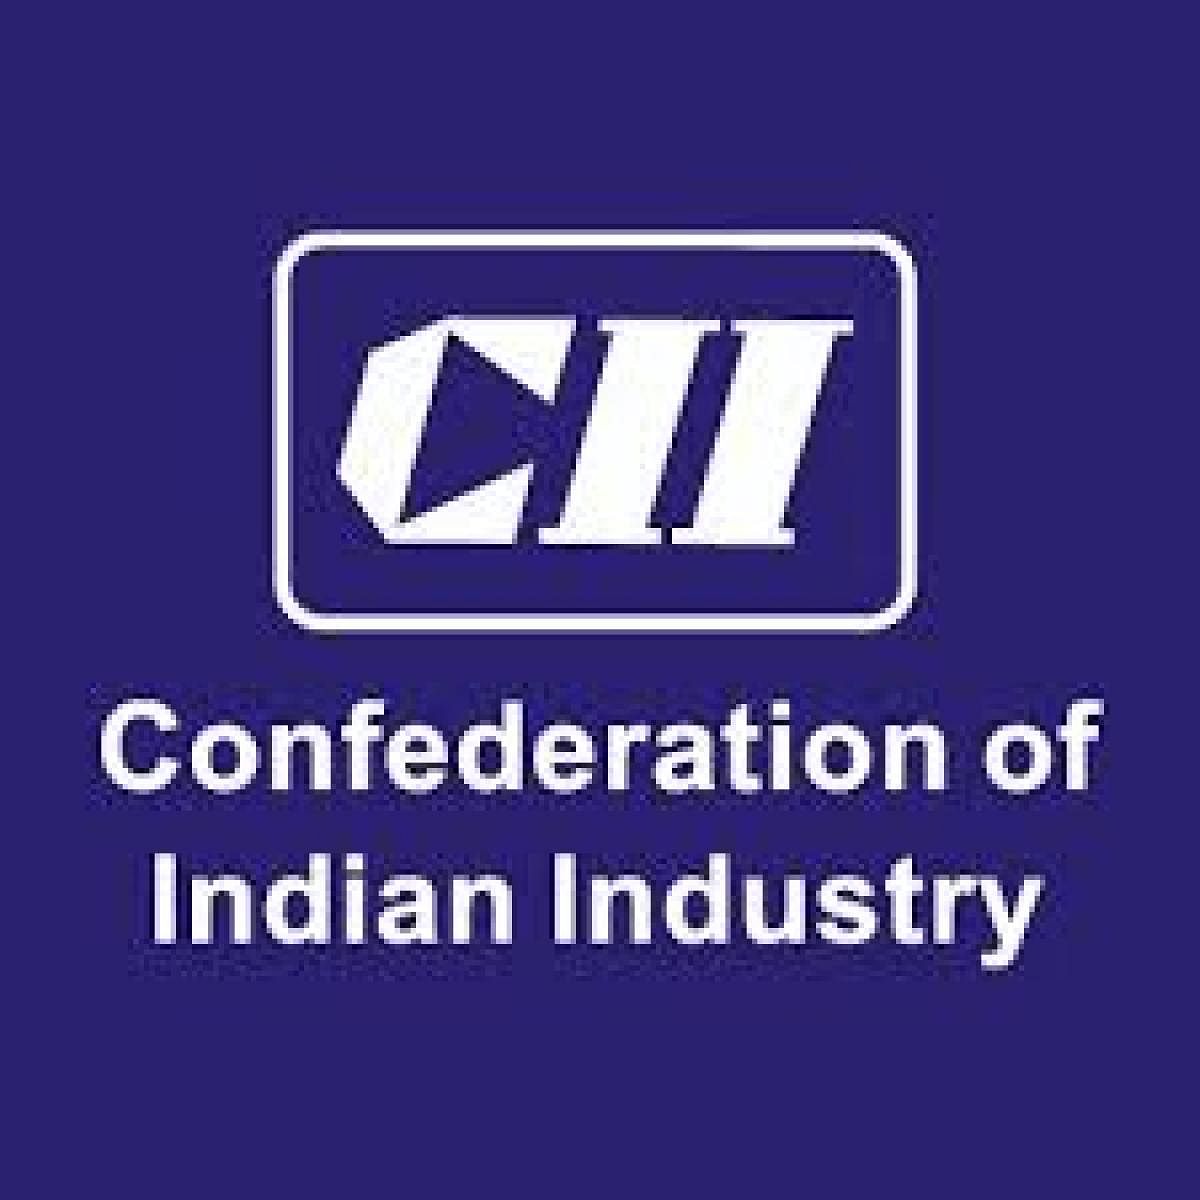 Confederation of Indian Industry (Photo by Twitter)